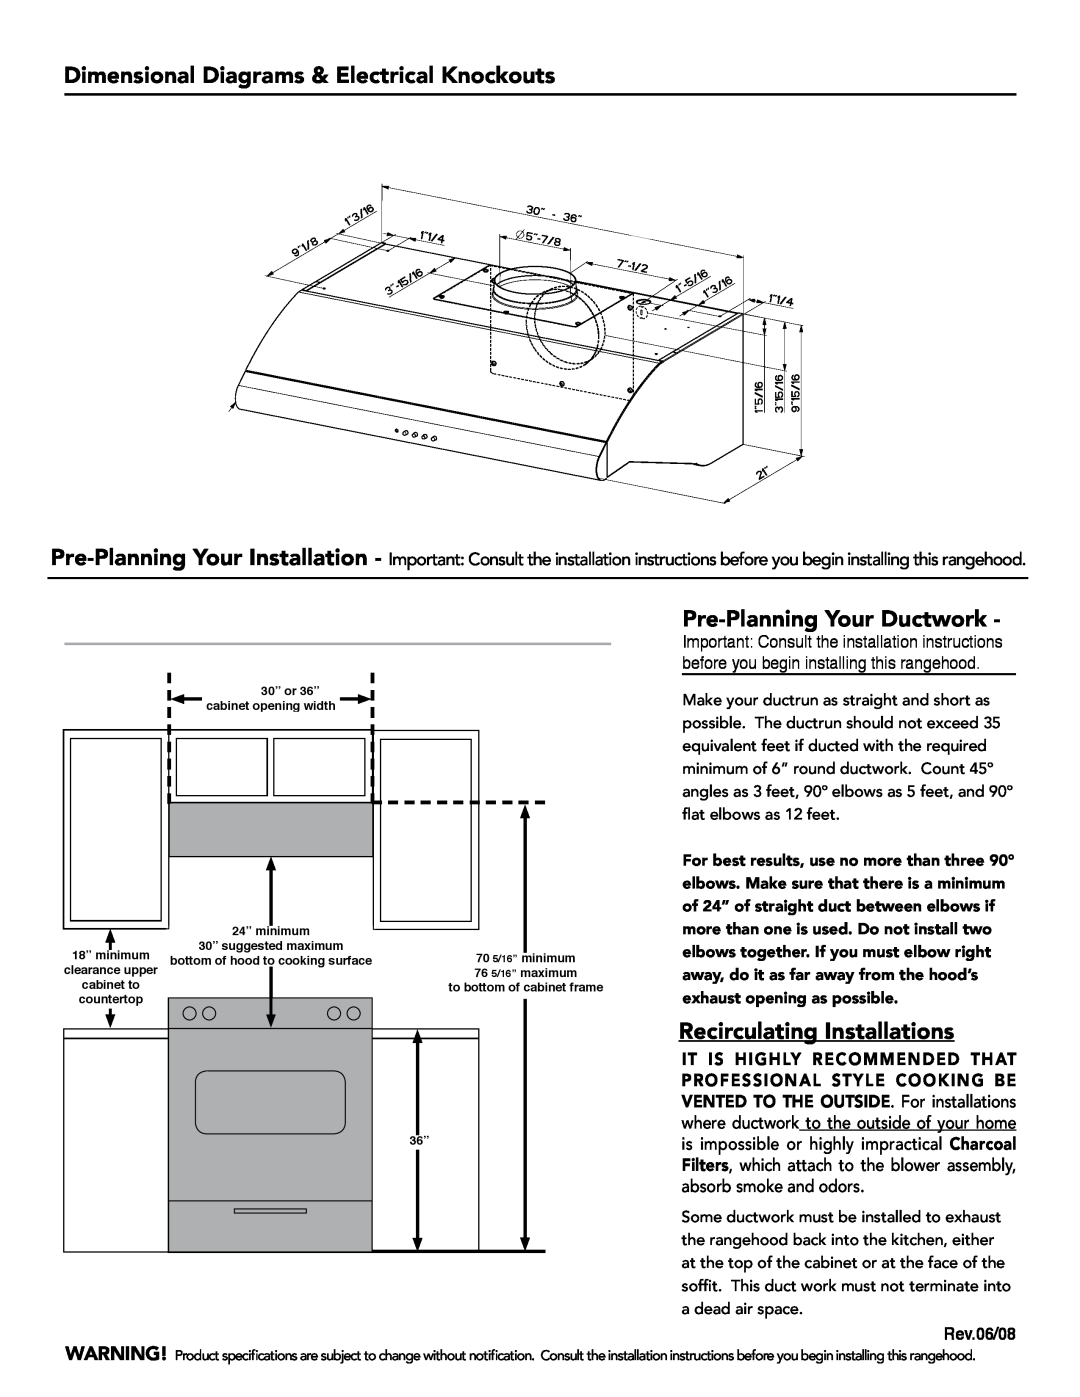 Faber 630003951 manual Dimensional Diagrams & Electrical Knockouts, Pre-PlanningYour Ductwork, Recirculating Installations 